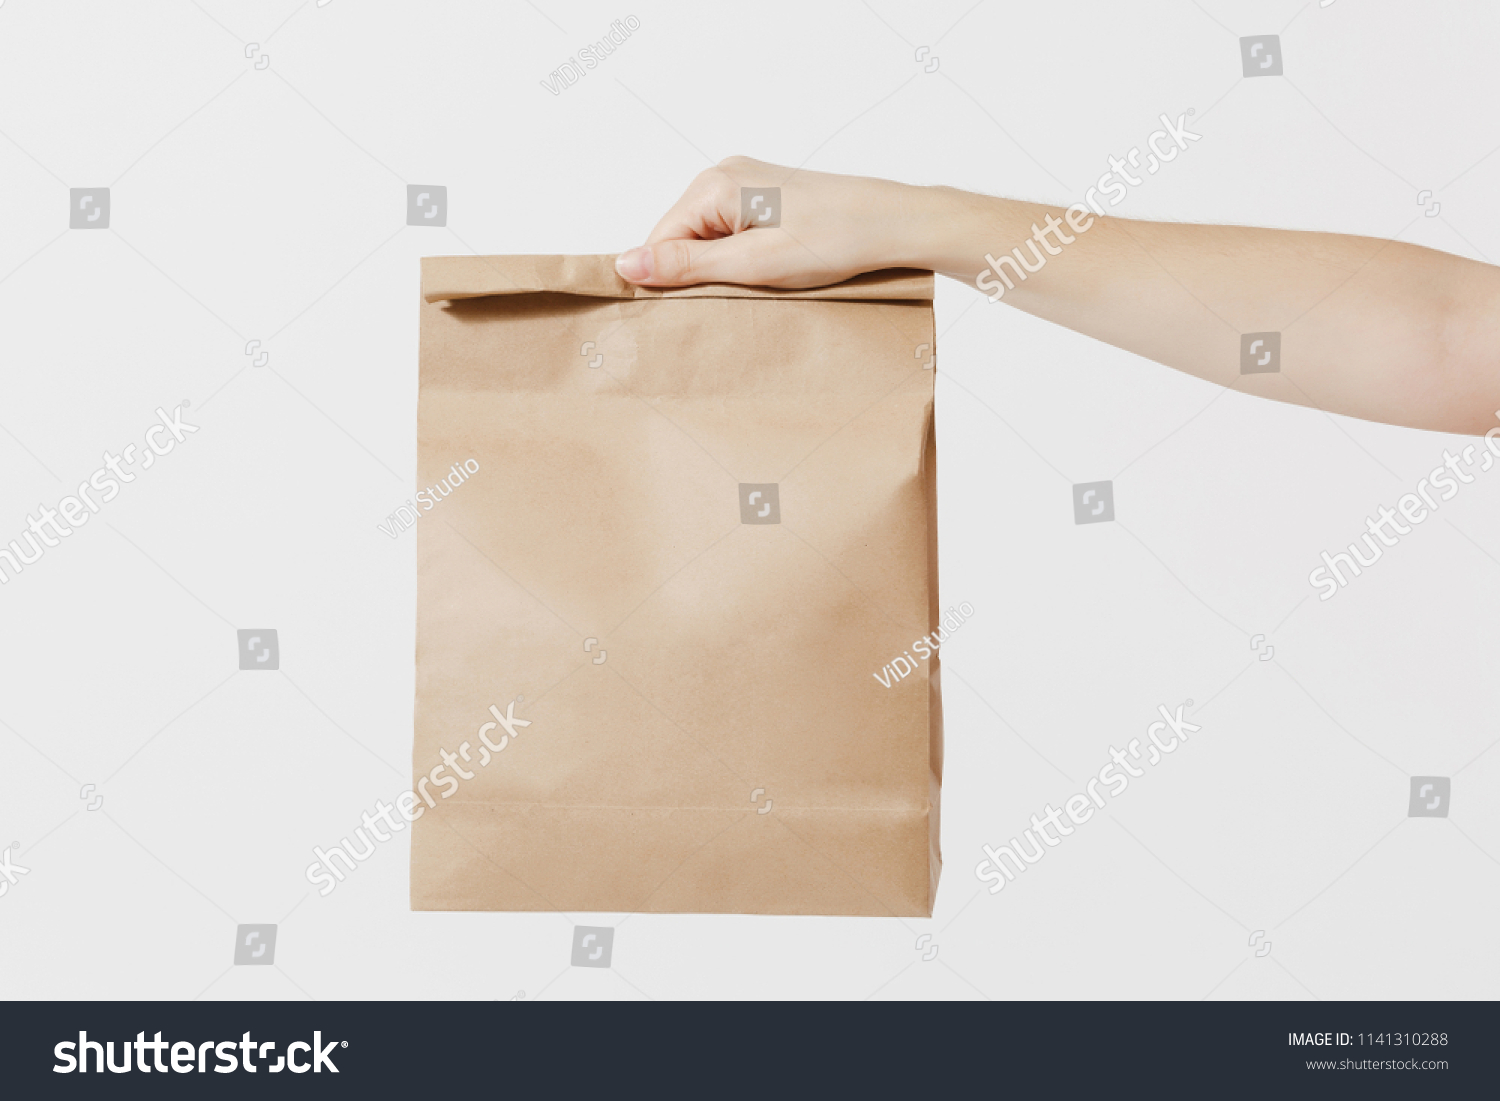 Close up female holds in hand brown clear empty blank craft paper bag for takeaway isolated on white background. Packaging template mock up. Delivery service concept. Copy space. Advertising area #1141310288